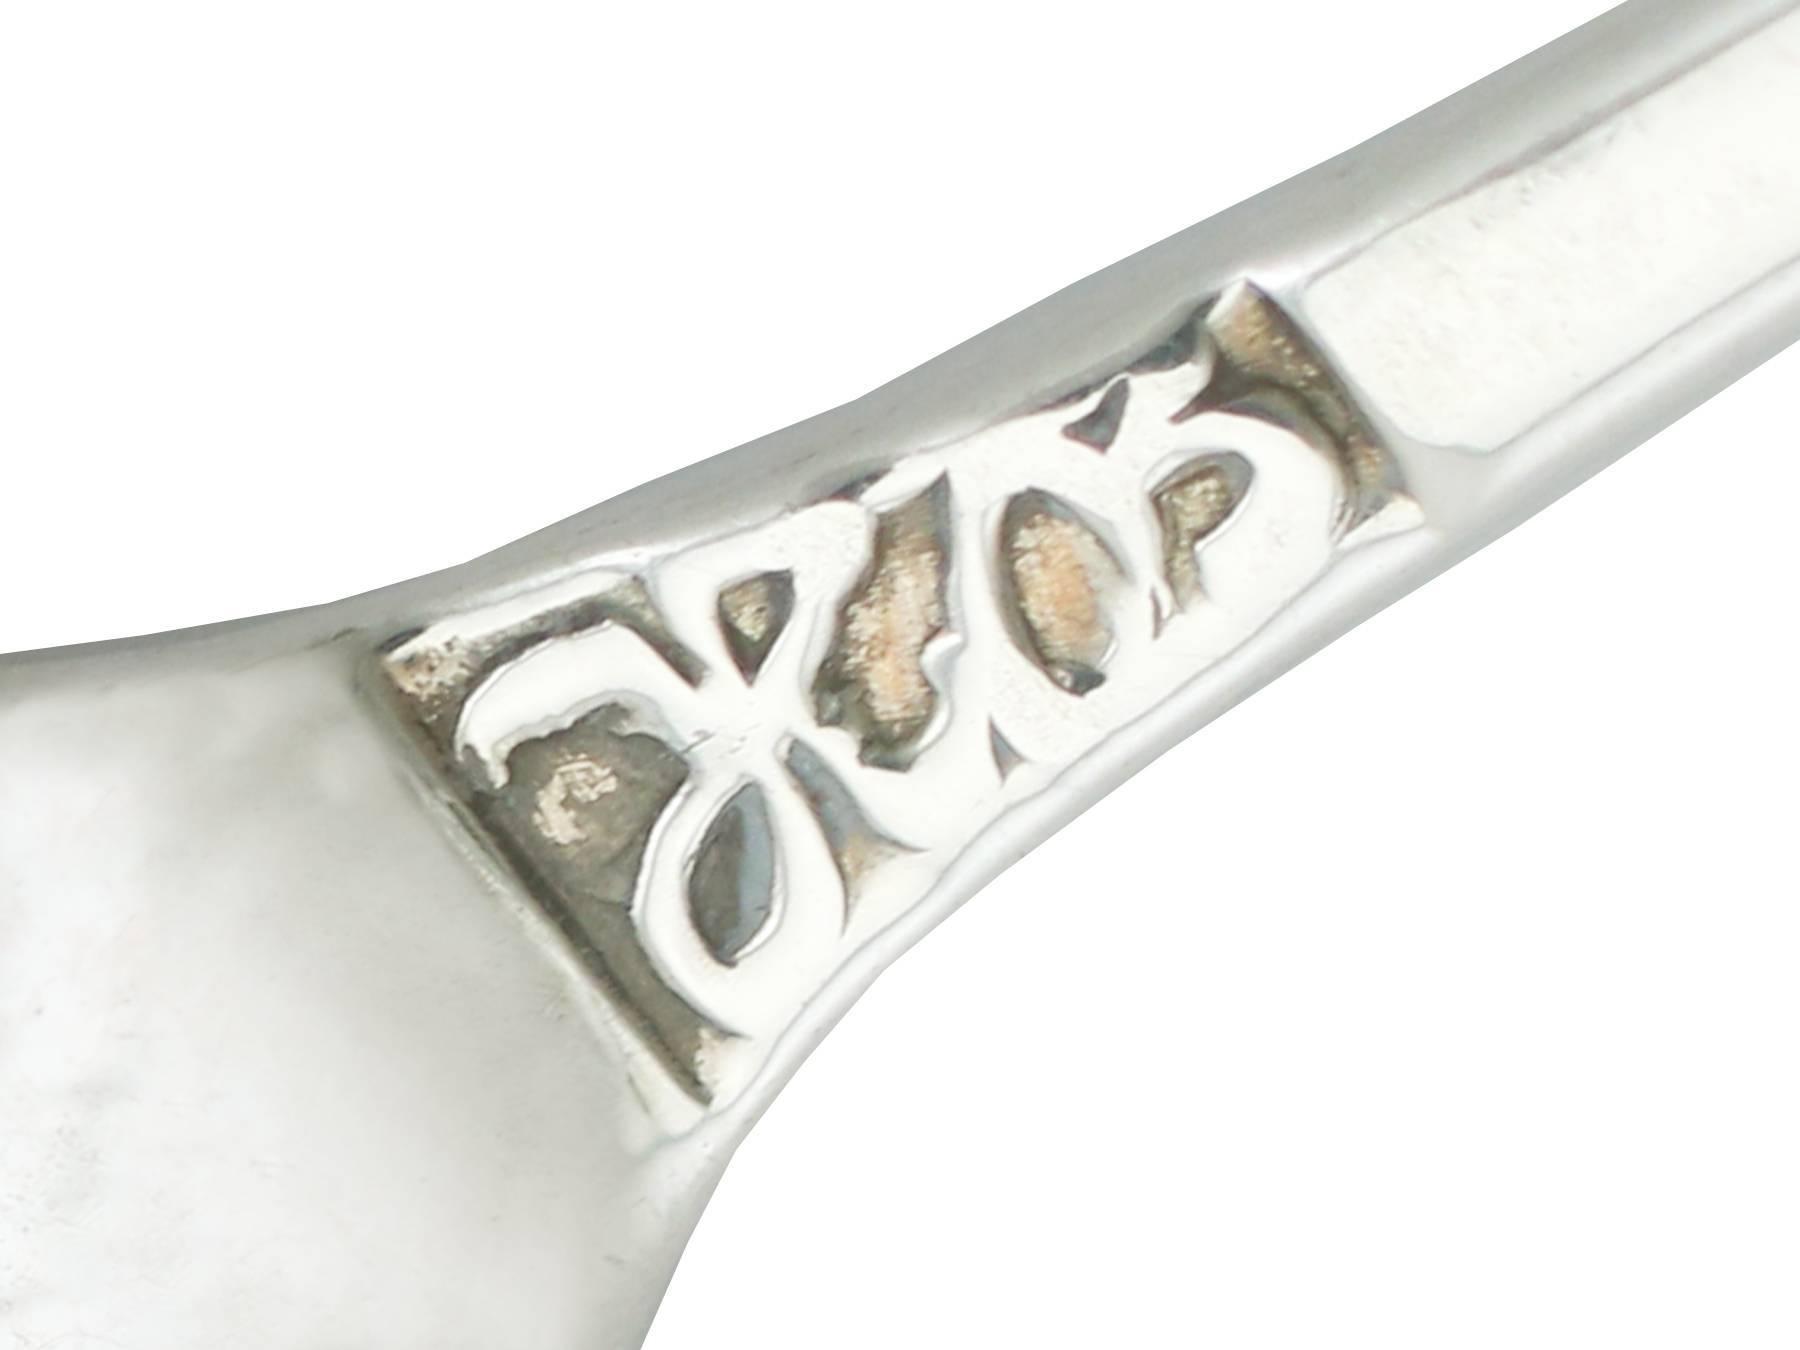 English 1780s Sterling Silver Mote Spoon by Hester Bateman